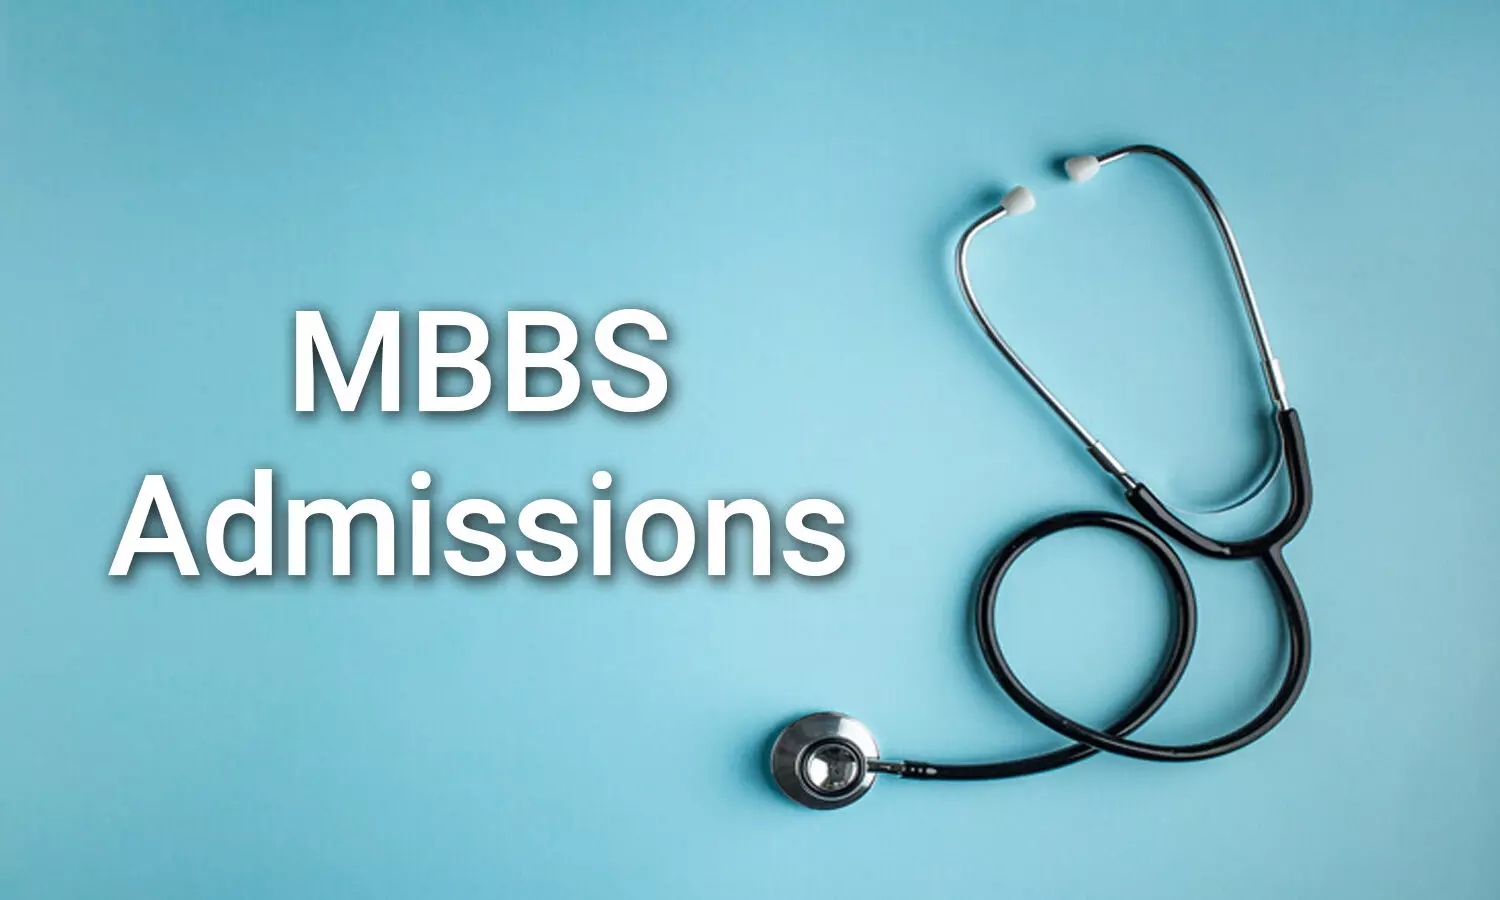 MBBS admissions at AFMC 2021: Check out eligibility criteria, no of seats, bond details